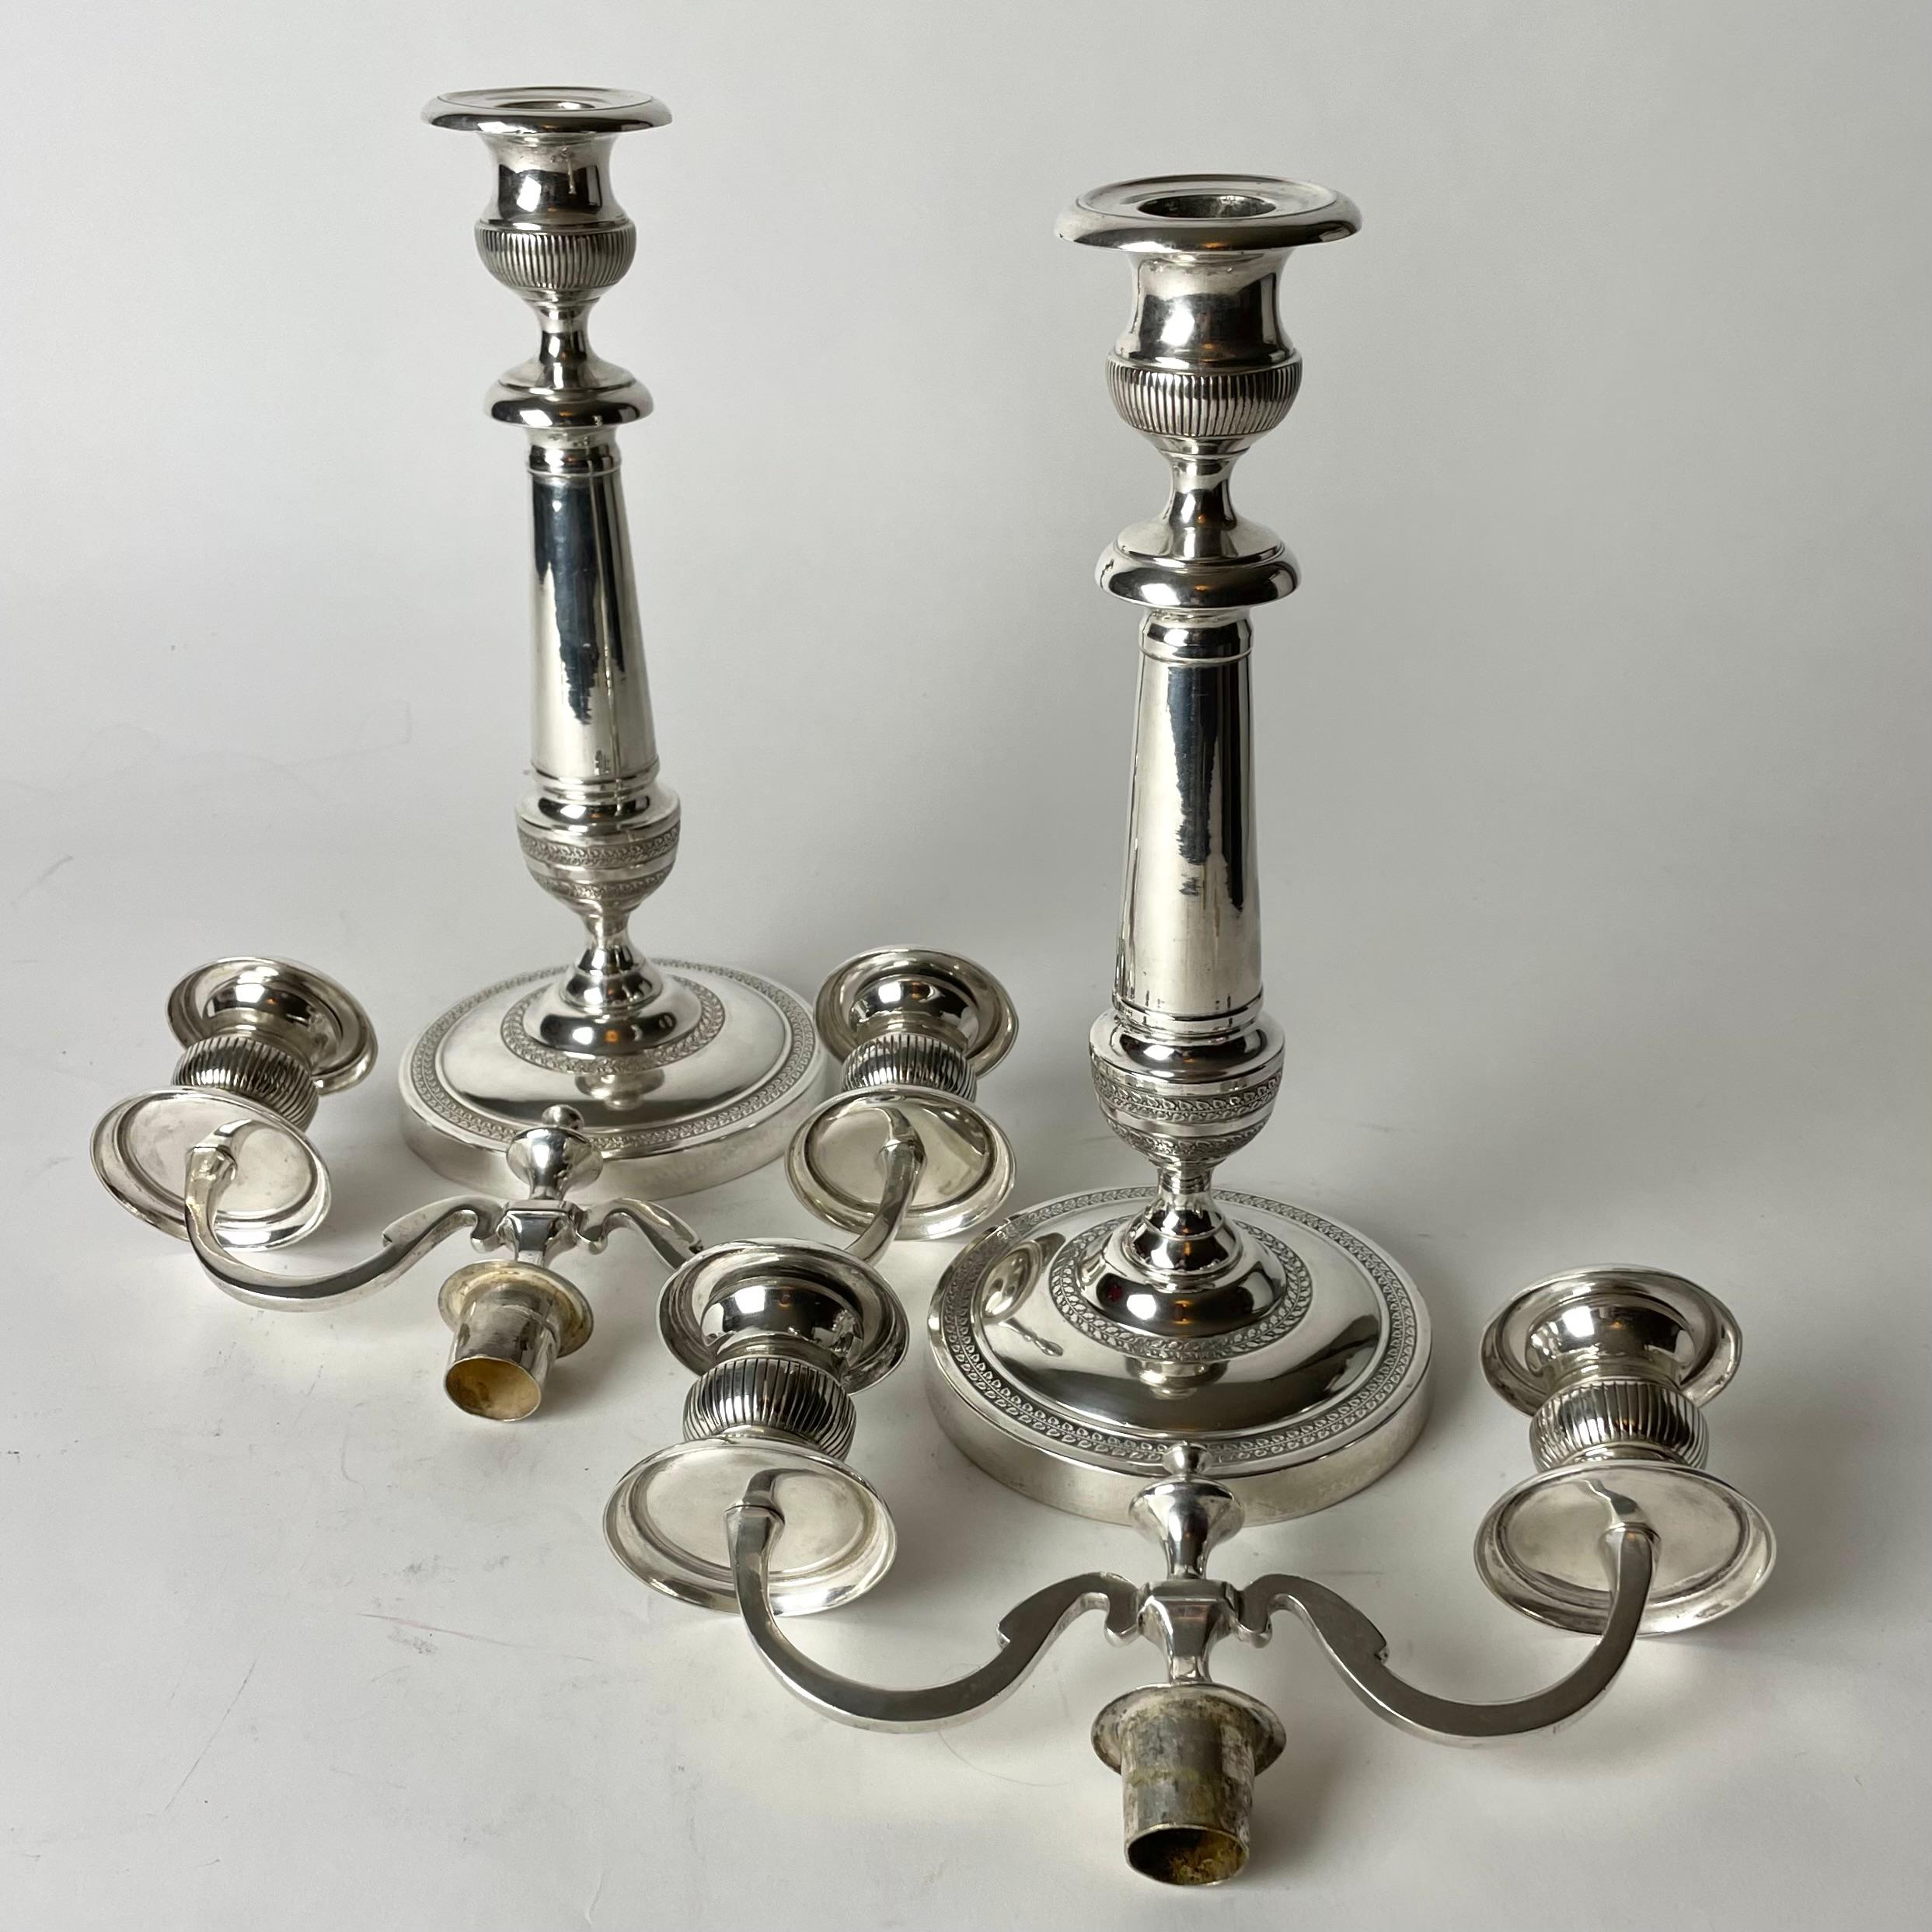 A pair of beautiful silver-plated Candelabras. Swedish Empire from the 1820s For Sale 4